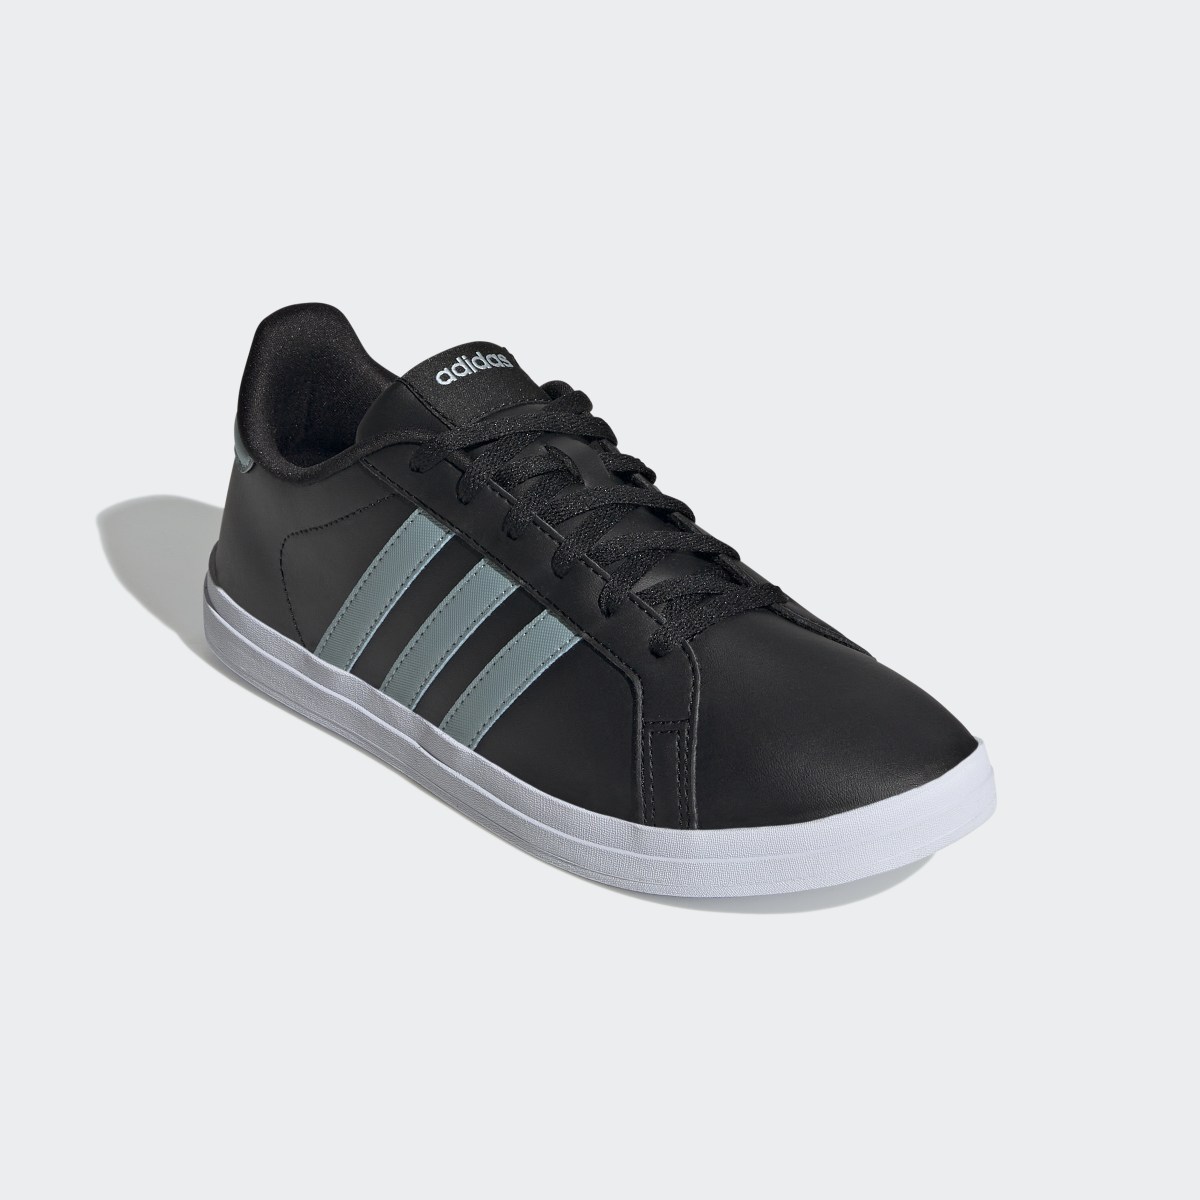 Adidas Courtpoint Shoes. 5